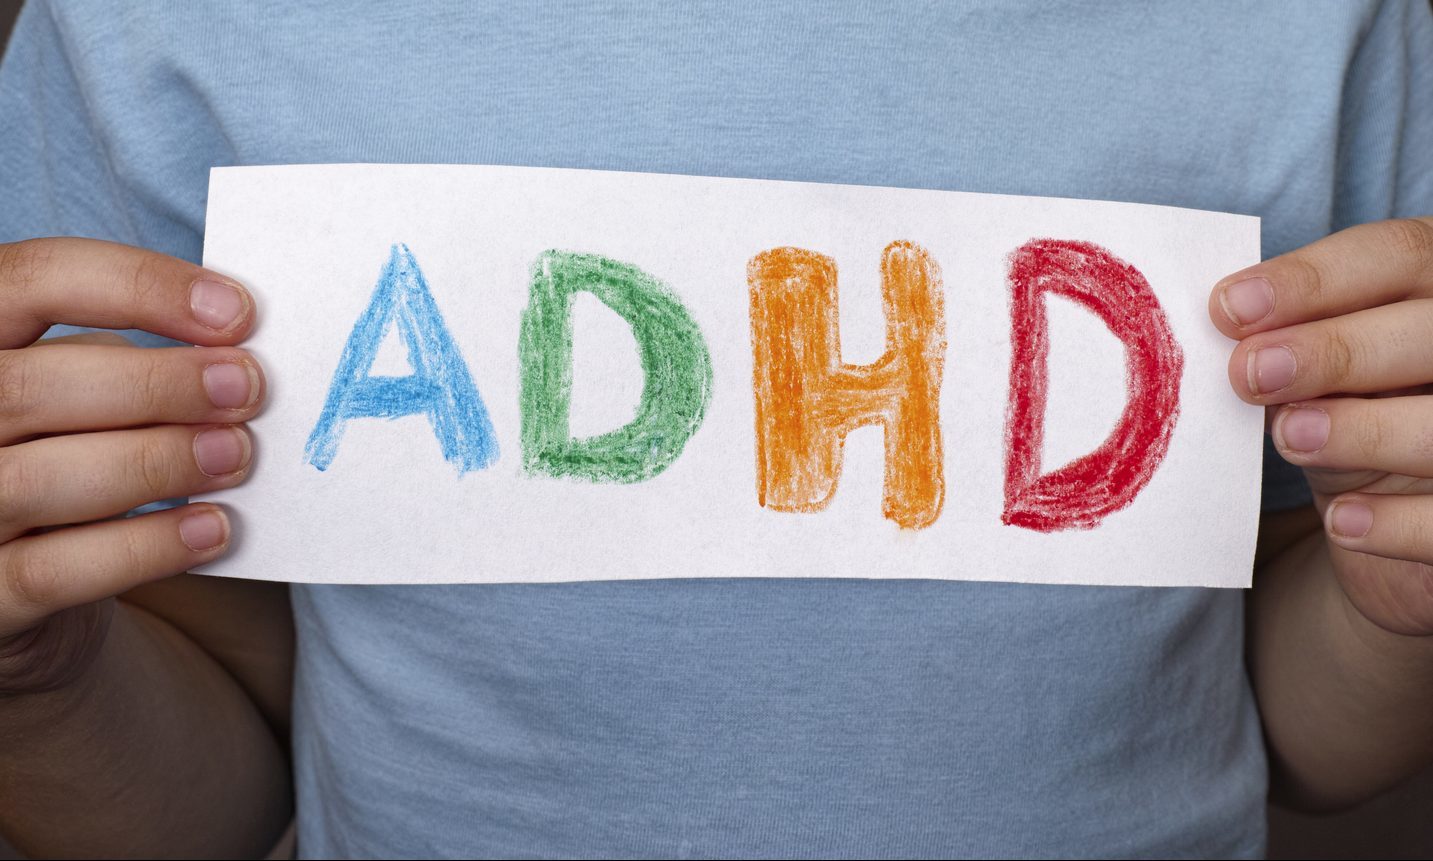 The teacher believes ADHD in adults may be frequently misdiagnosed as anxiety or depression.